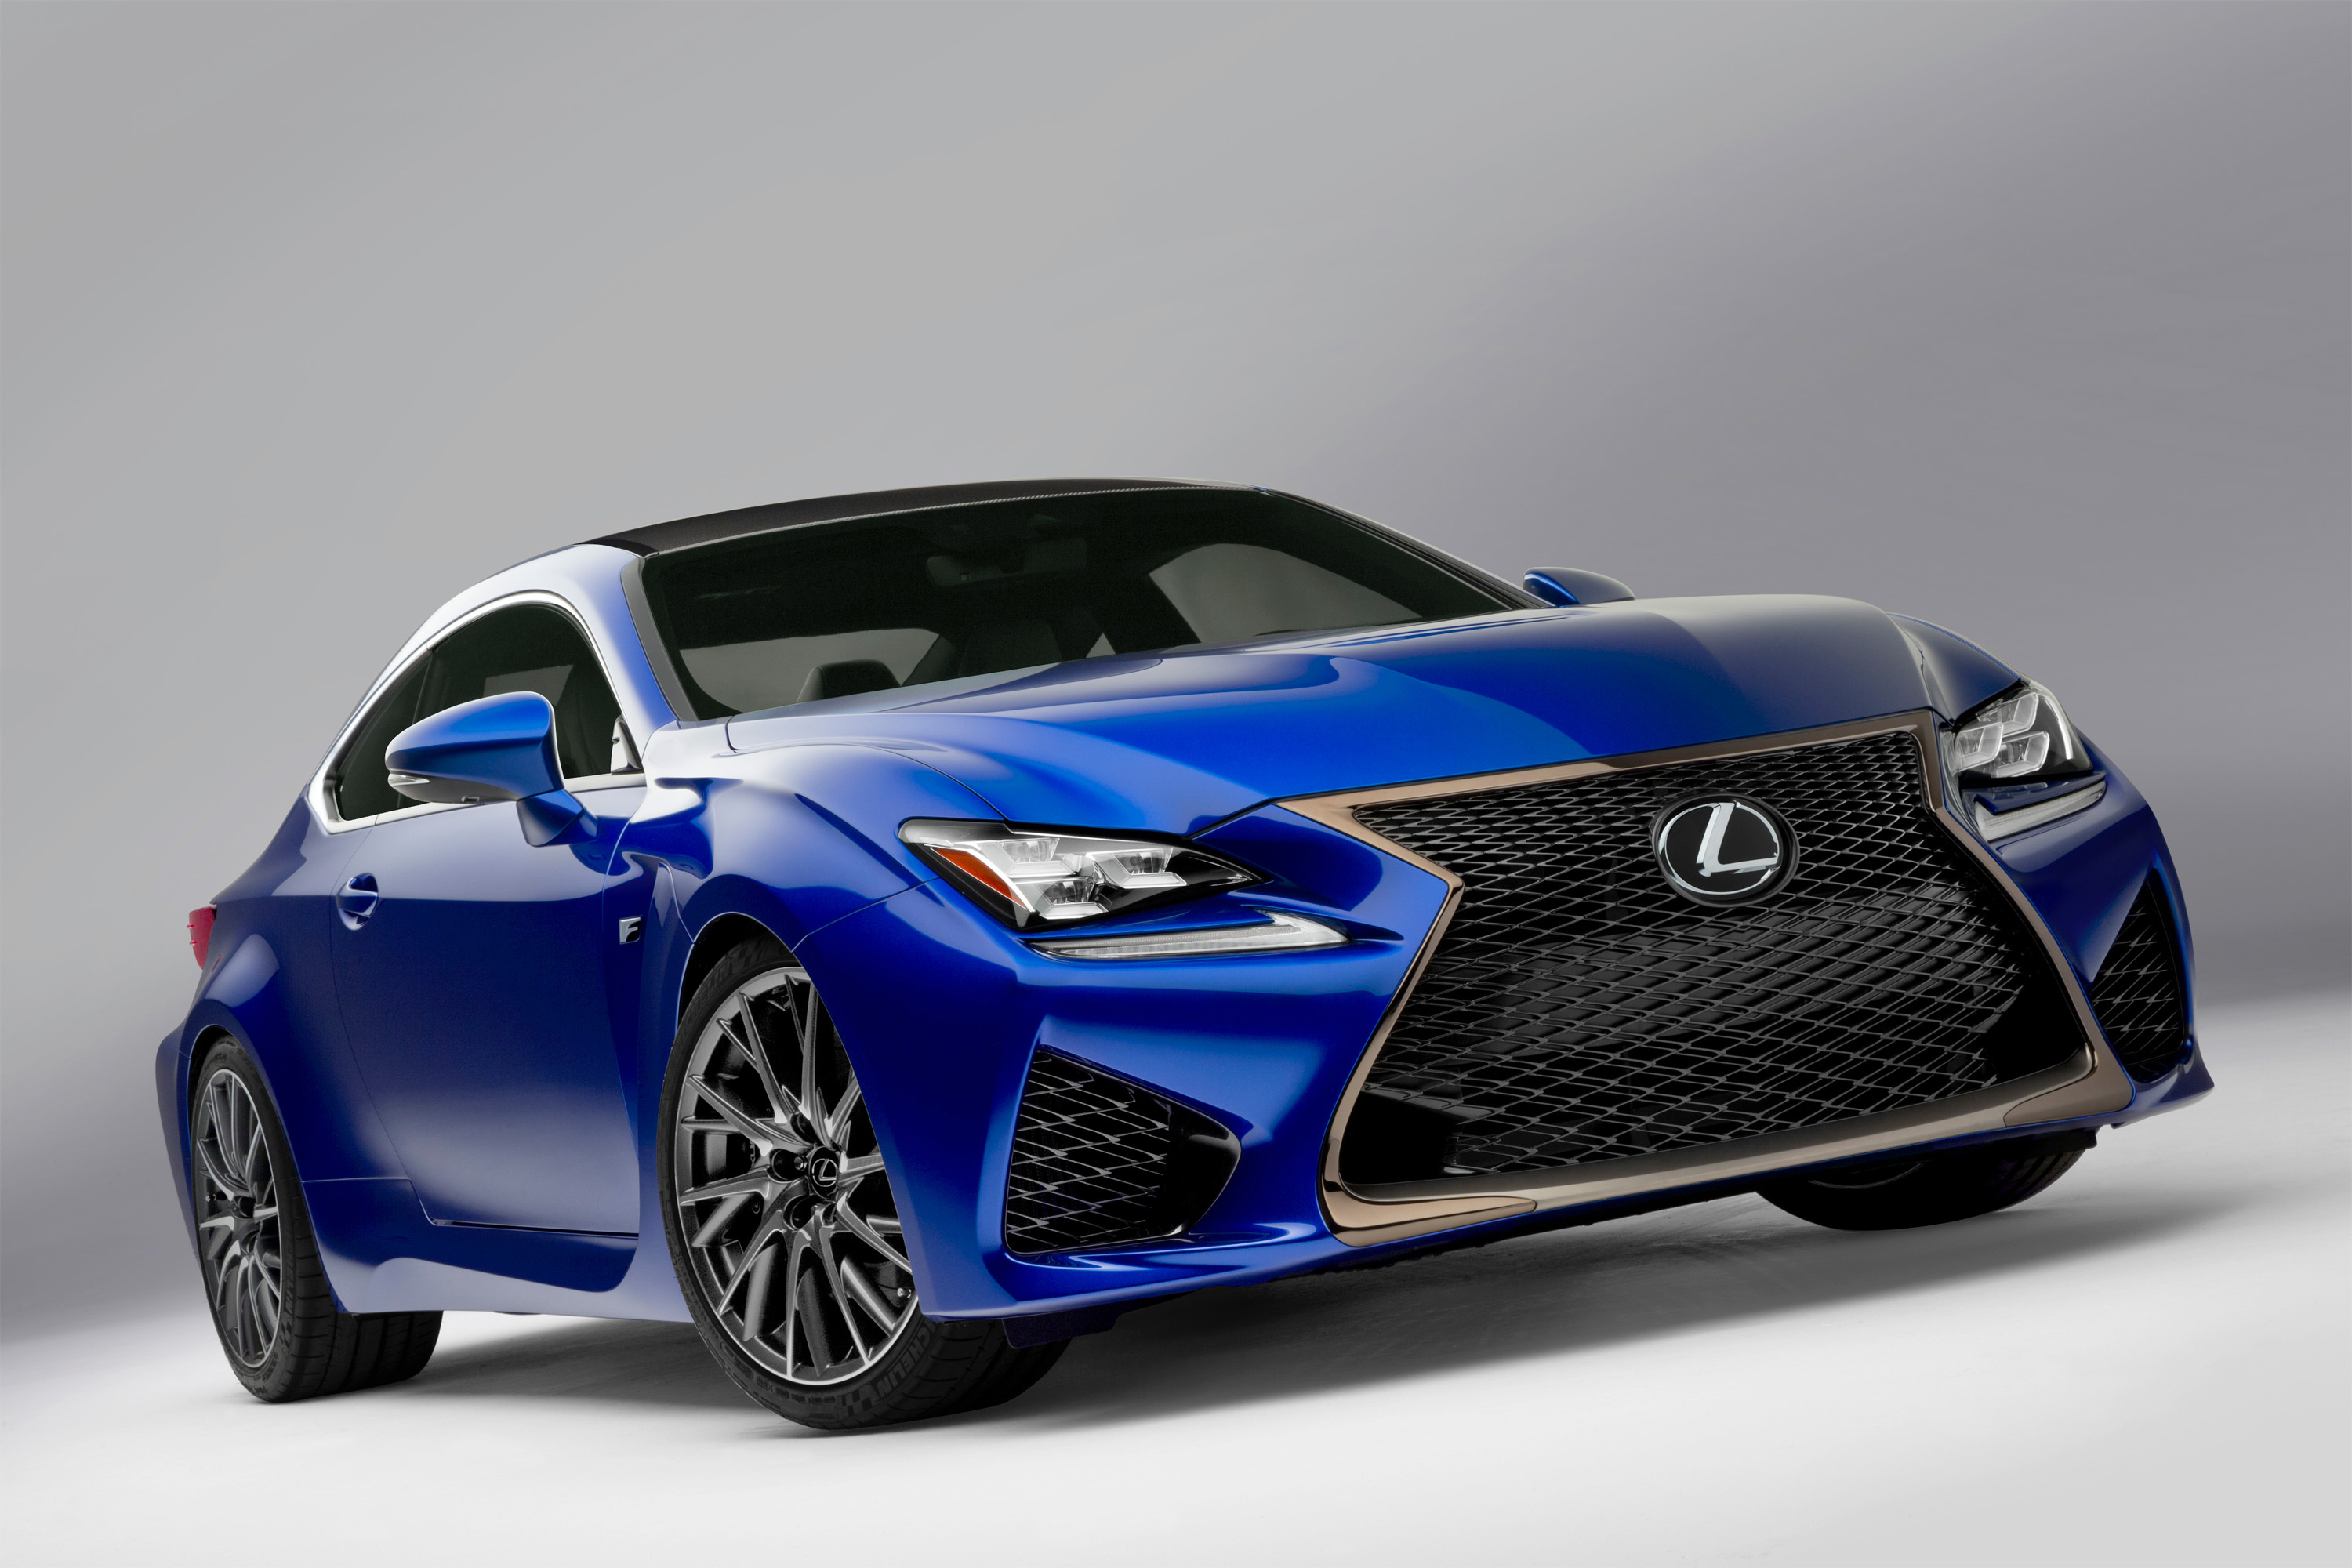 2015 Lexus Rc F Official Photos Of The Sexy 460hp Coupe Clublexus